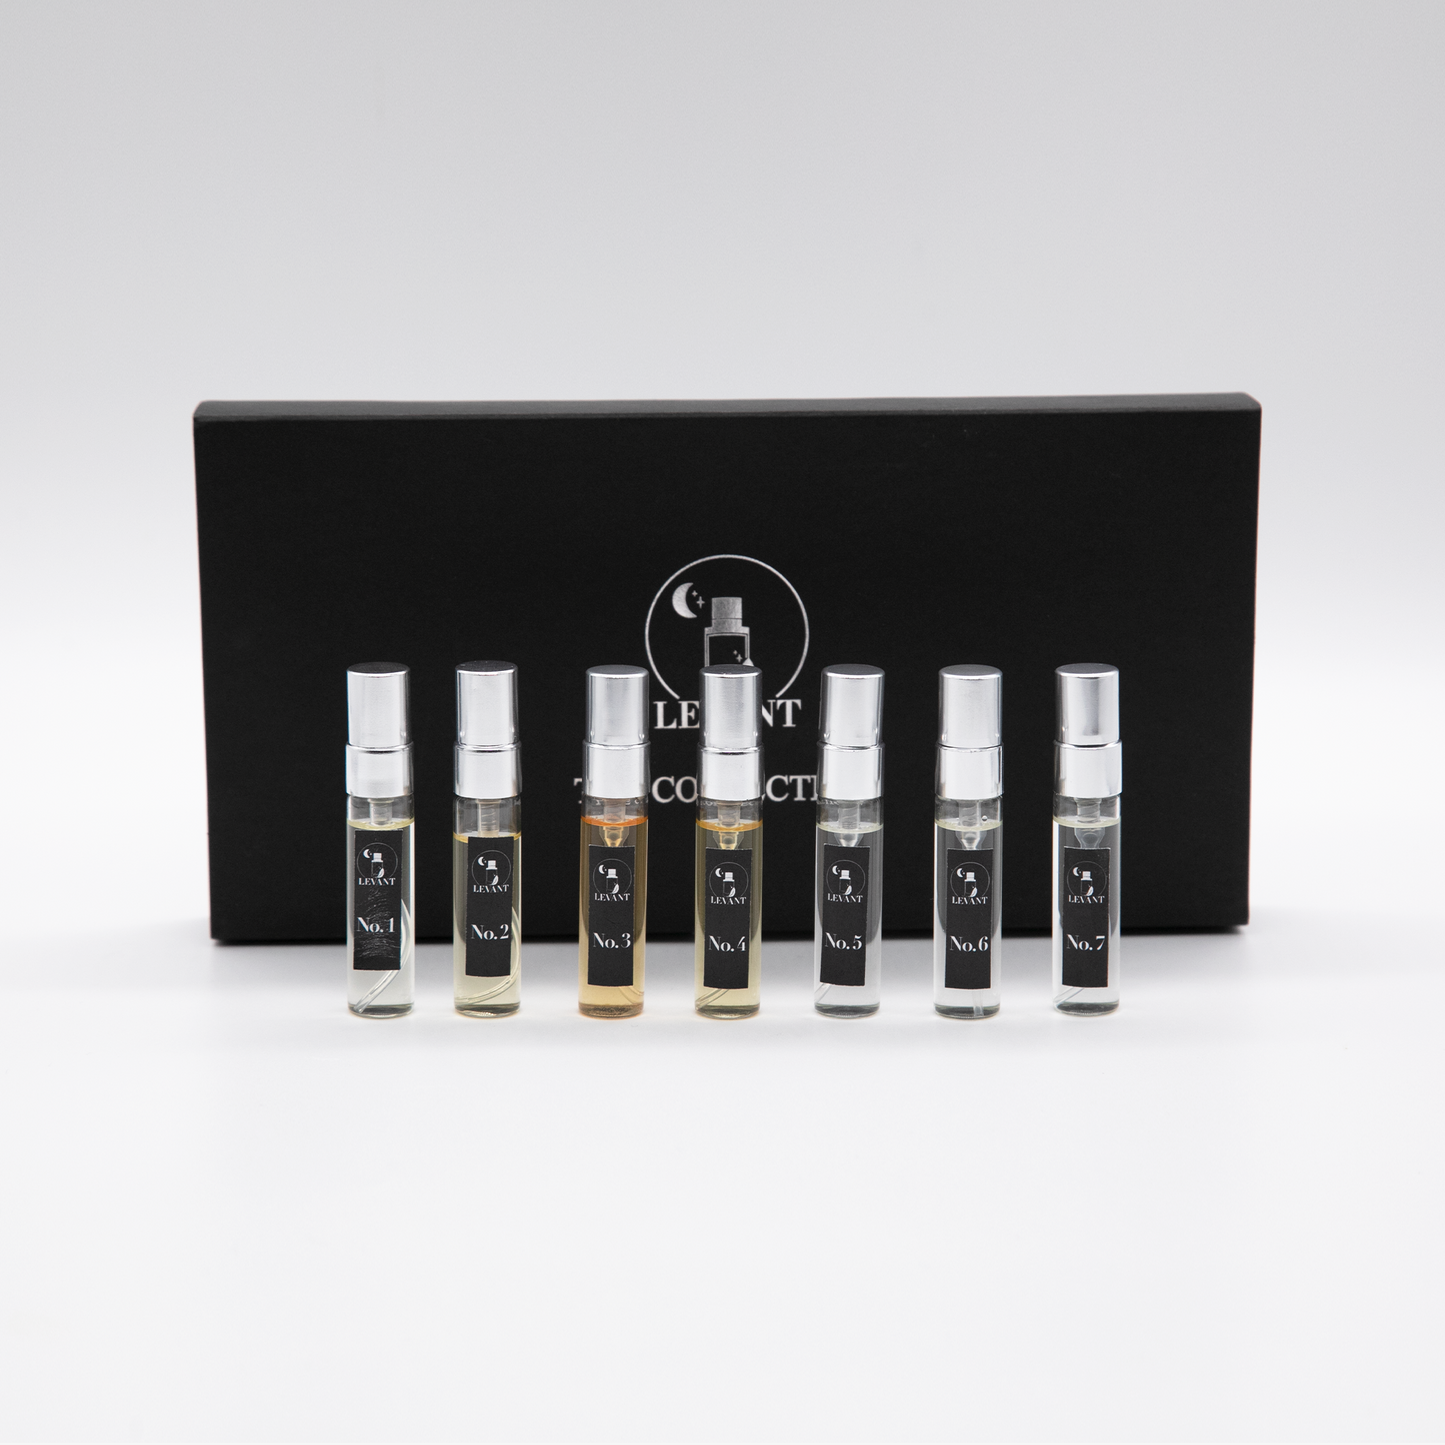 The levant perfume collection 5ml bottles with gift box behind